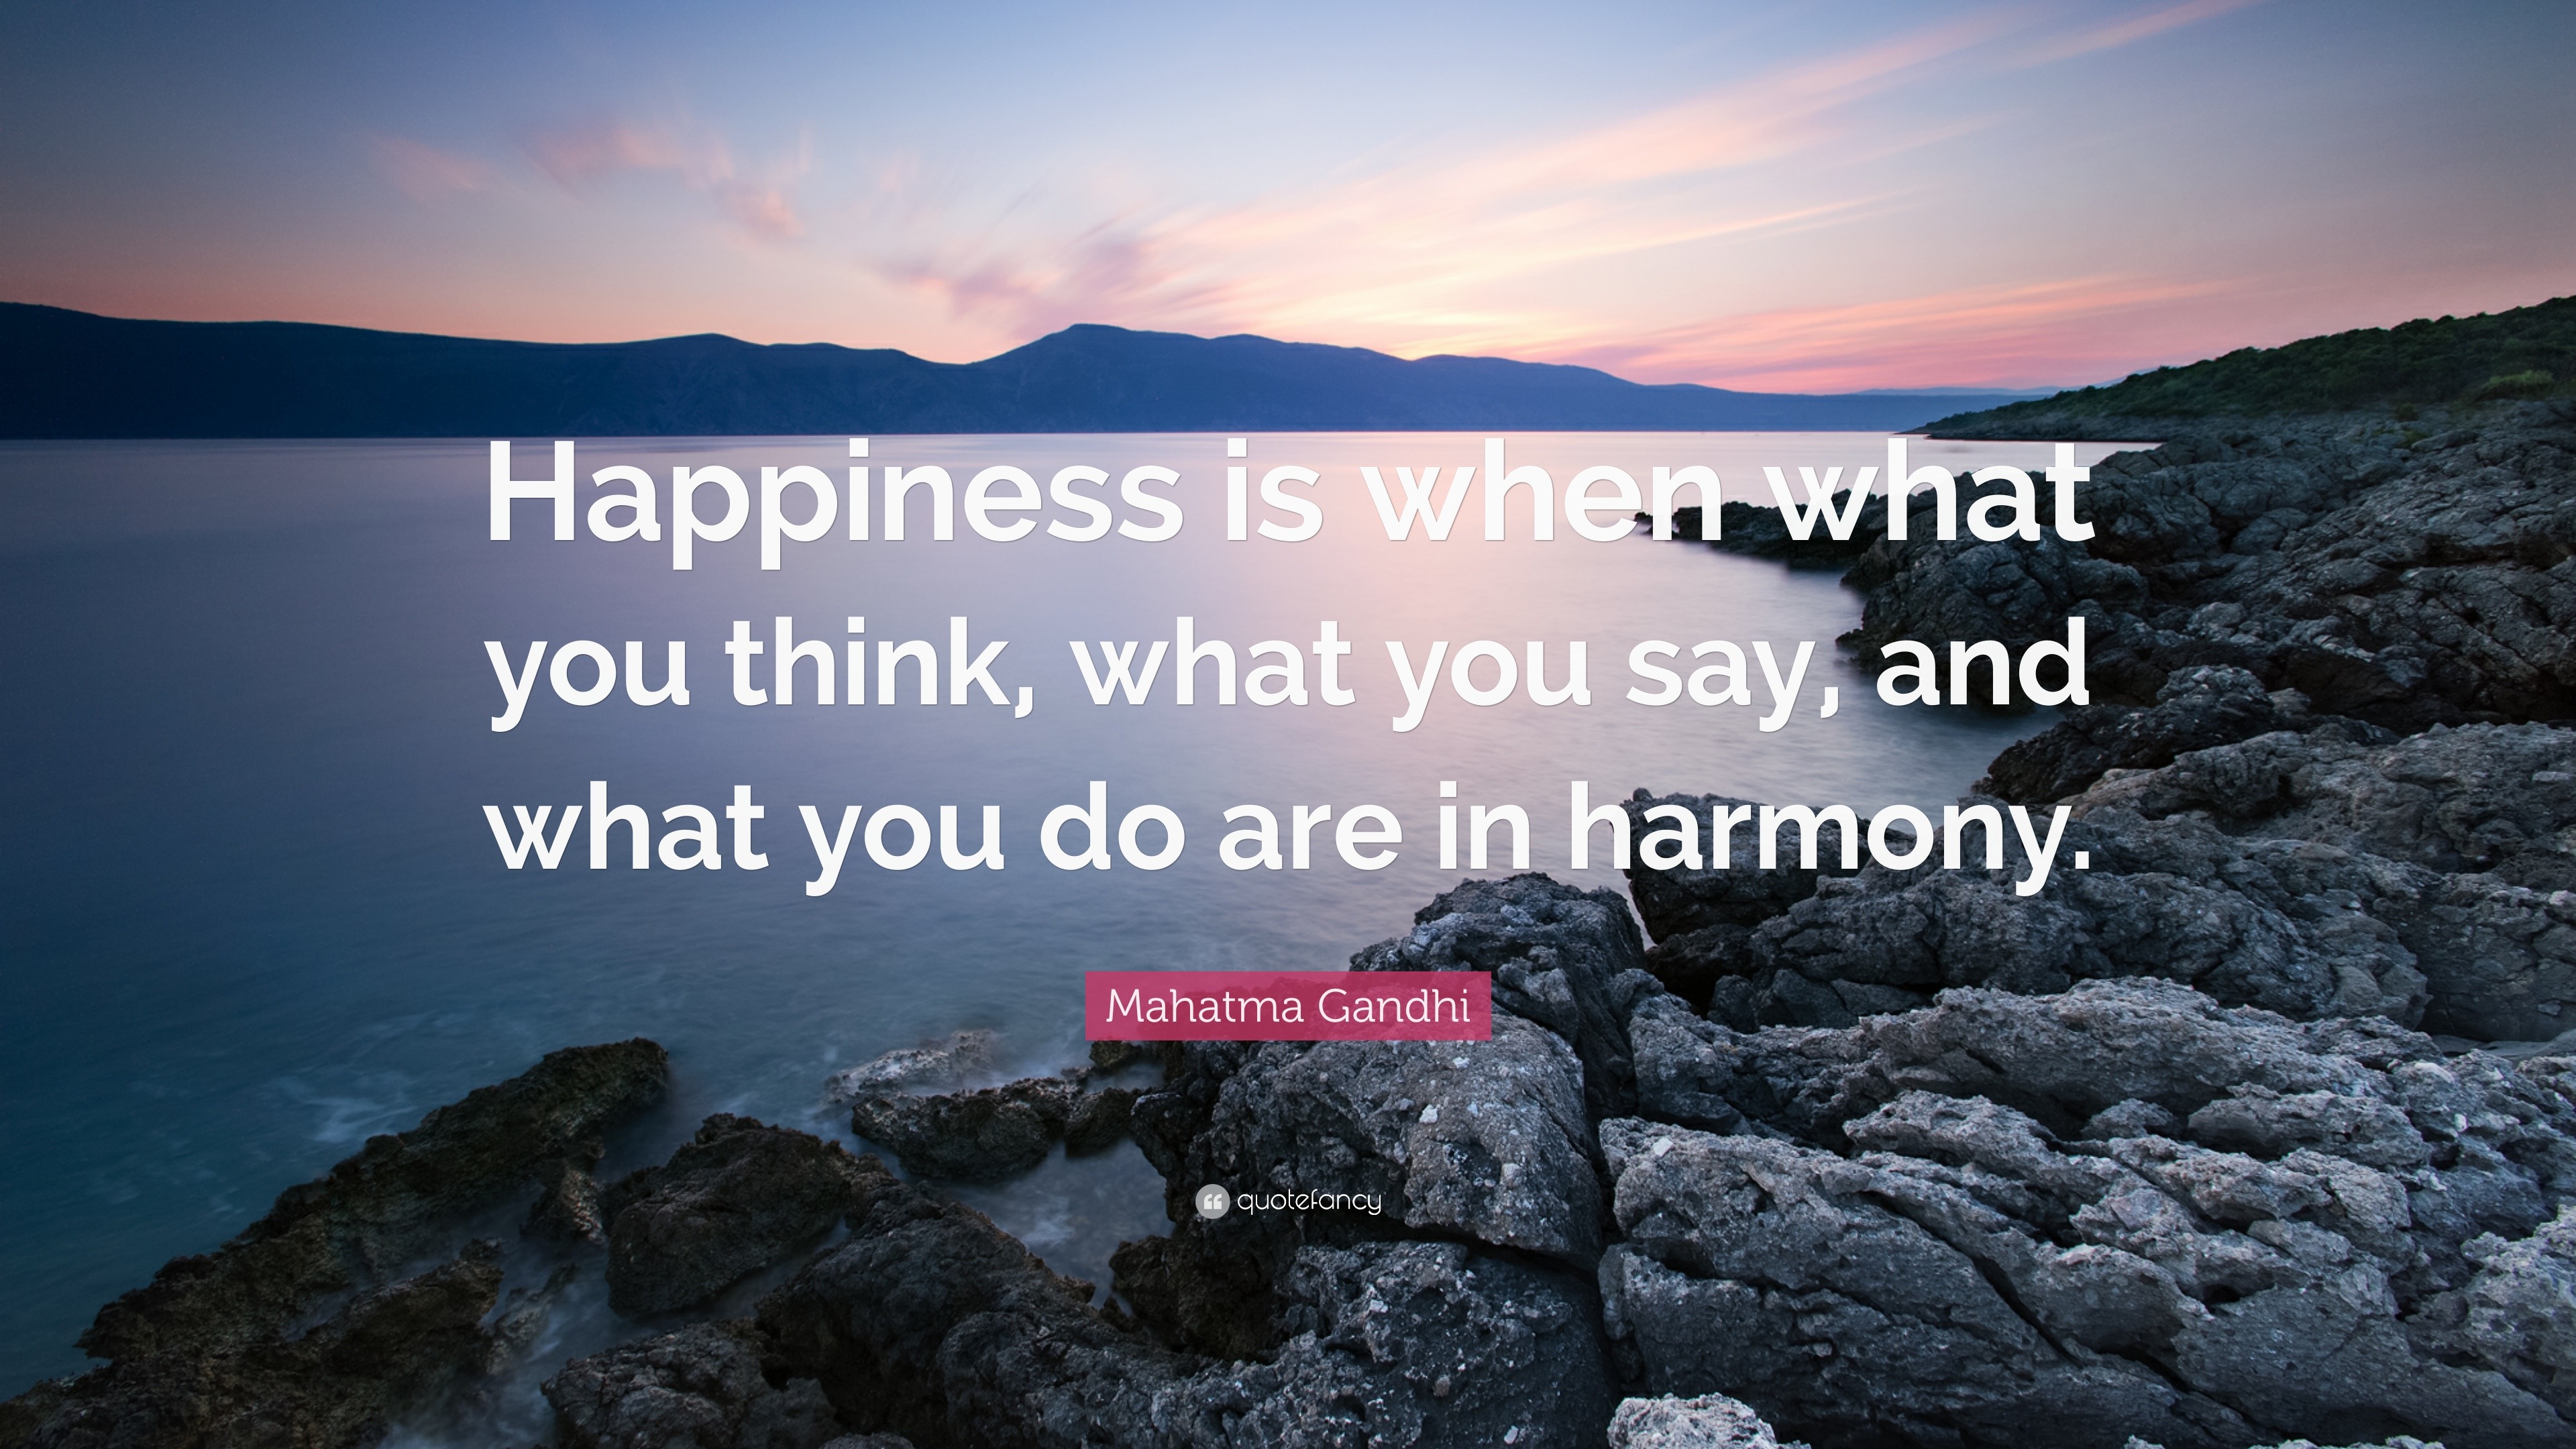 Mahatma Gandhi Quote: “Happiness is when what you think, what you say ...